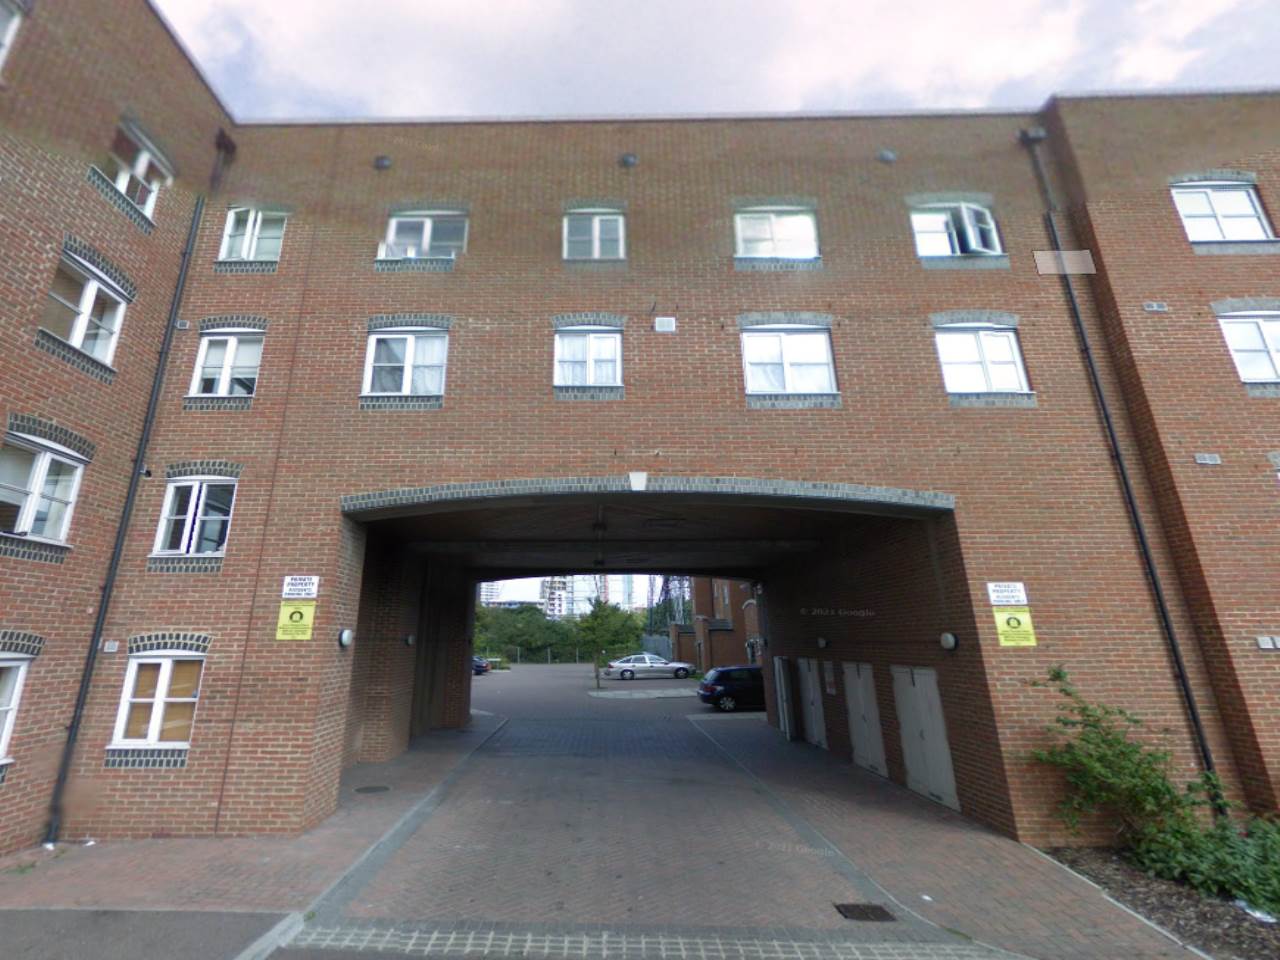 2 bed flat to rent in Otter Close, Stratford - Property Image 1